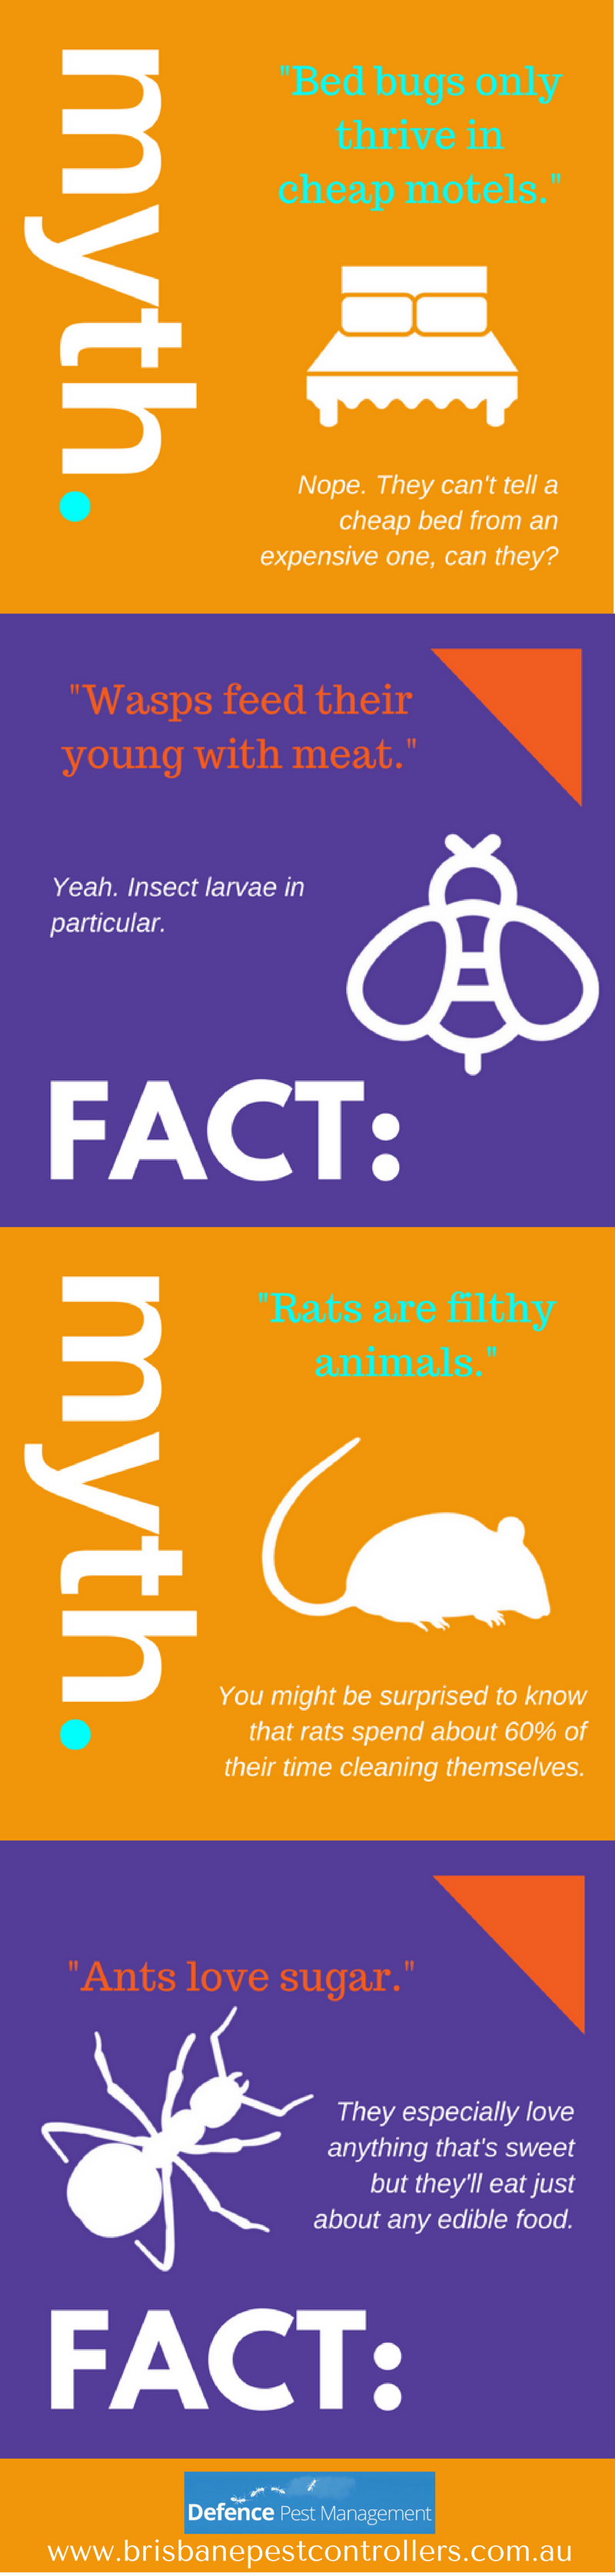 facts-and-myth-02